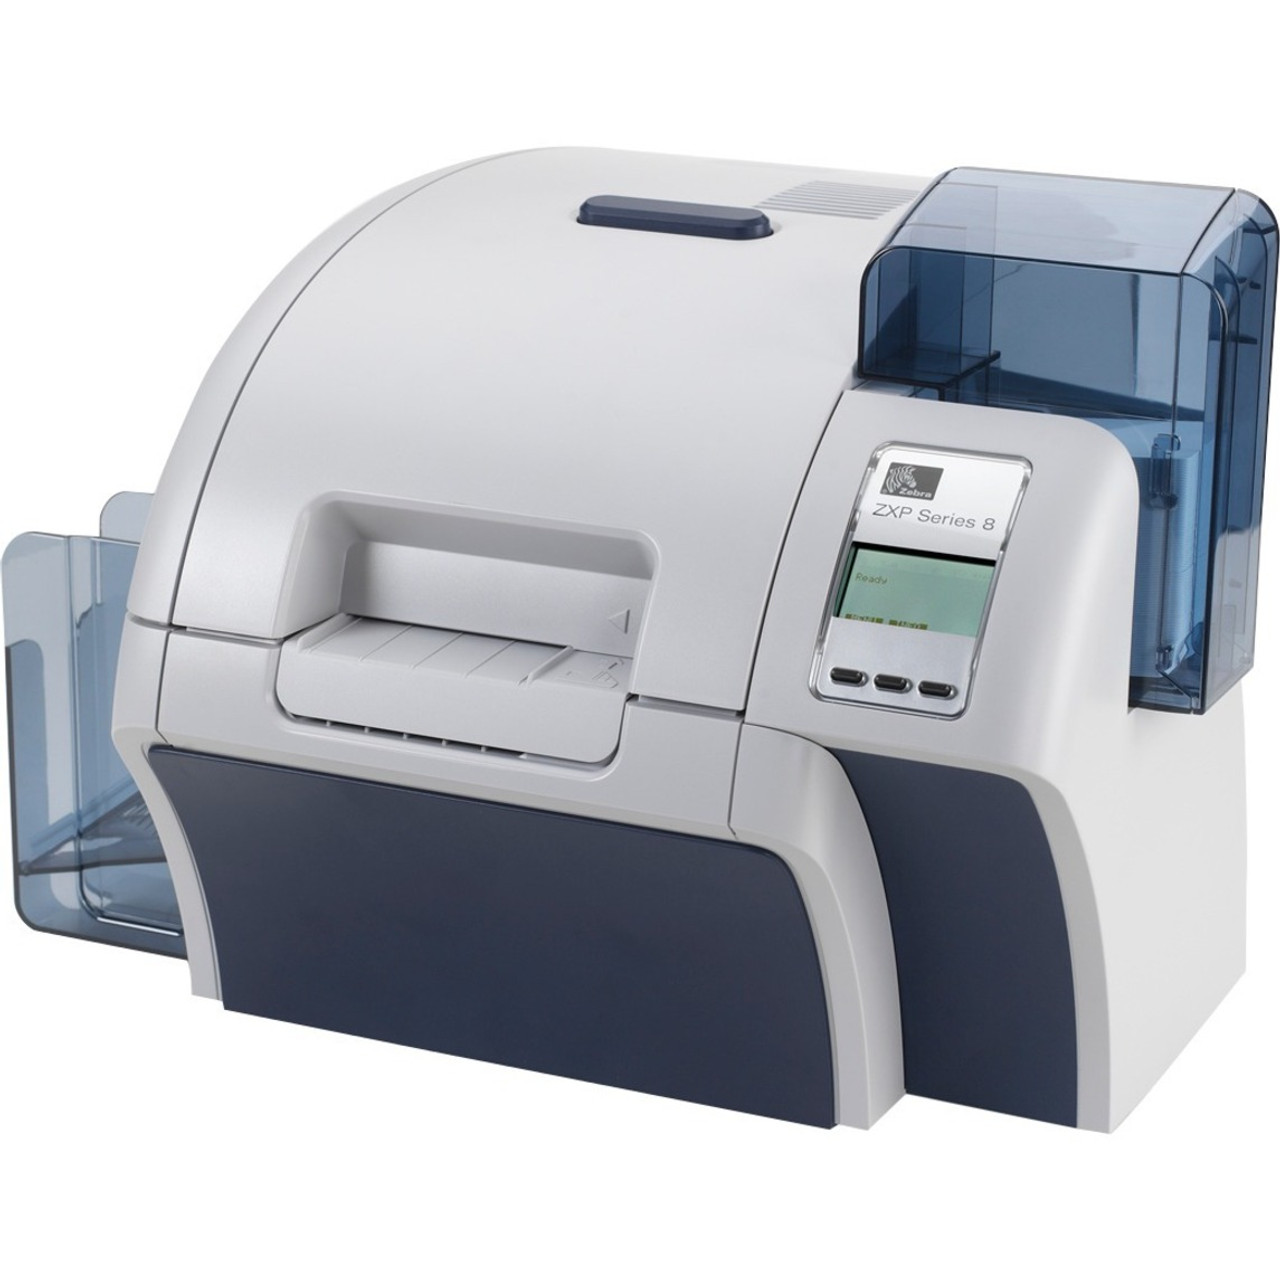 Zebra ZXP Series 8 Double Sided Dye Sublimation/Thermal Transfer Printer - Color - Card Print - Ethernet - USB - US - Z83-000C000GUS00